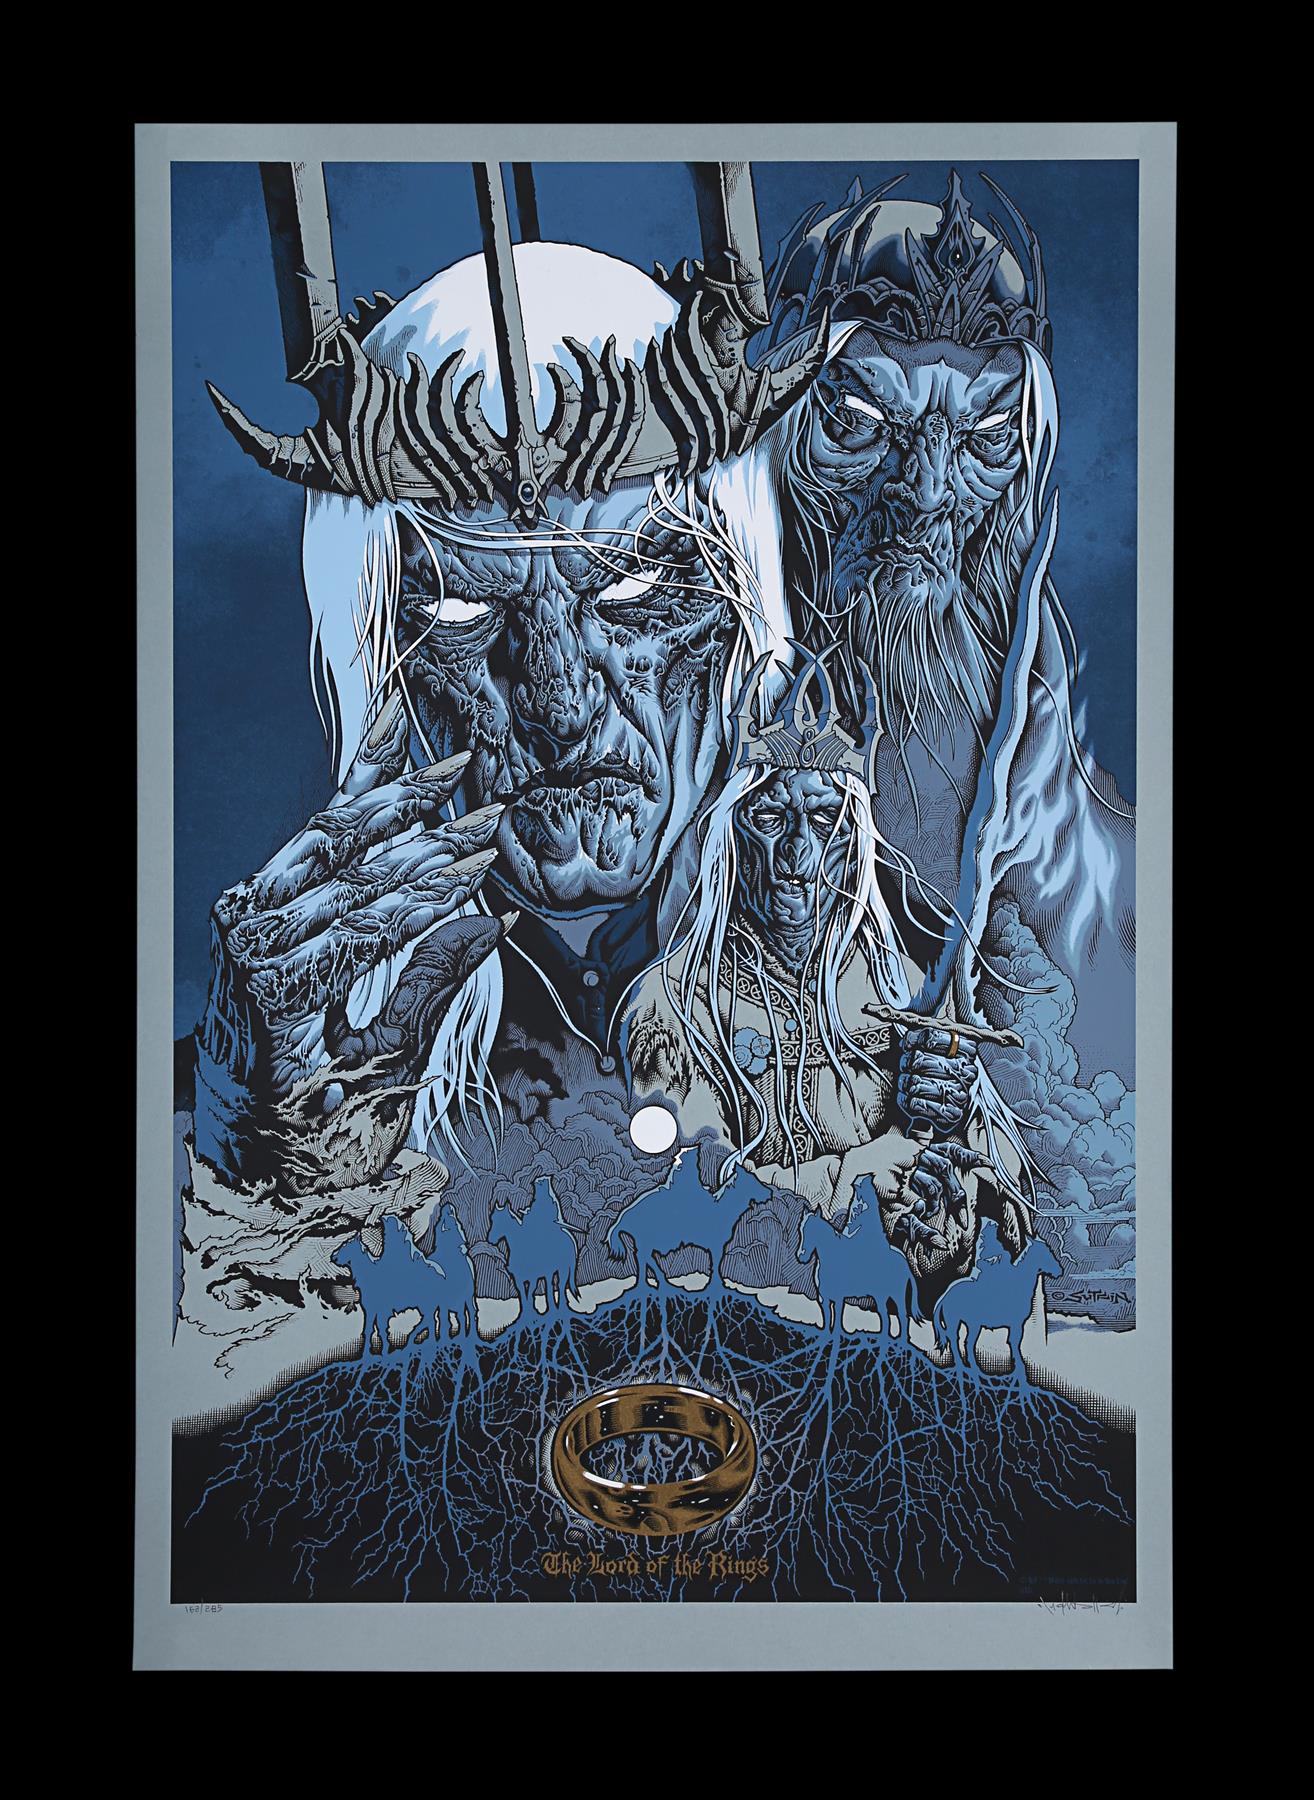 THE LORD OF THE RINGS (2001) - Mondo Poster - "Servants of Sauron", 2013